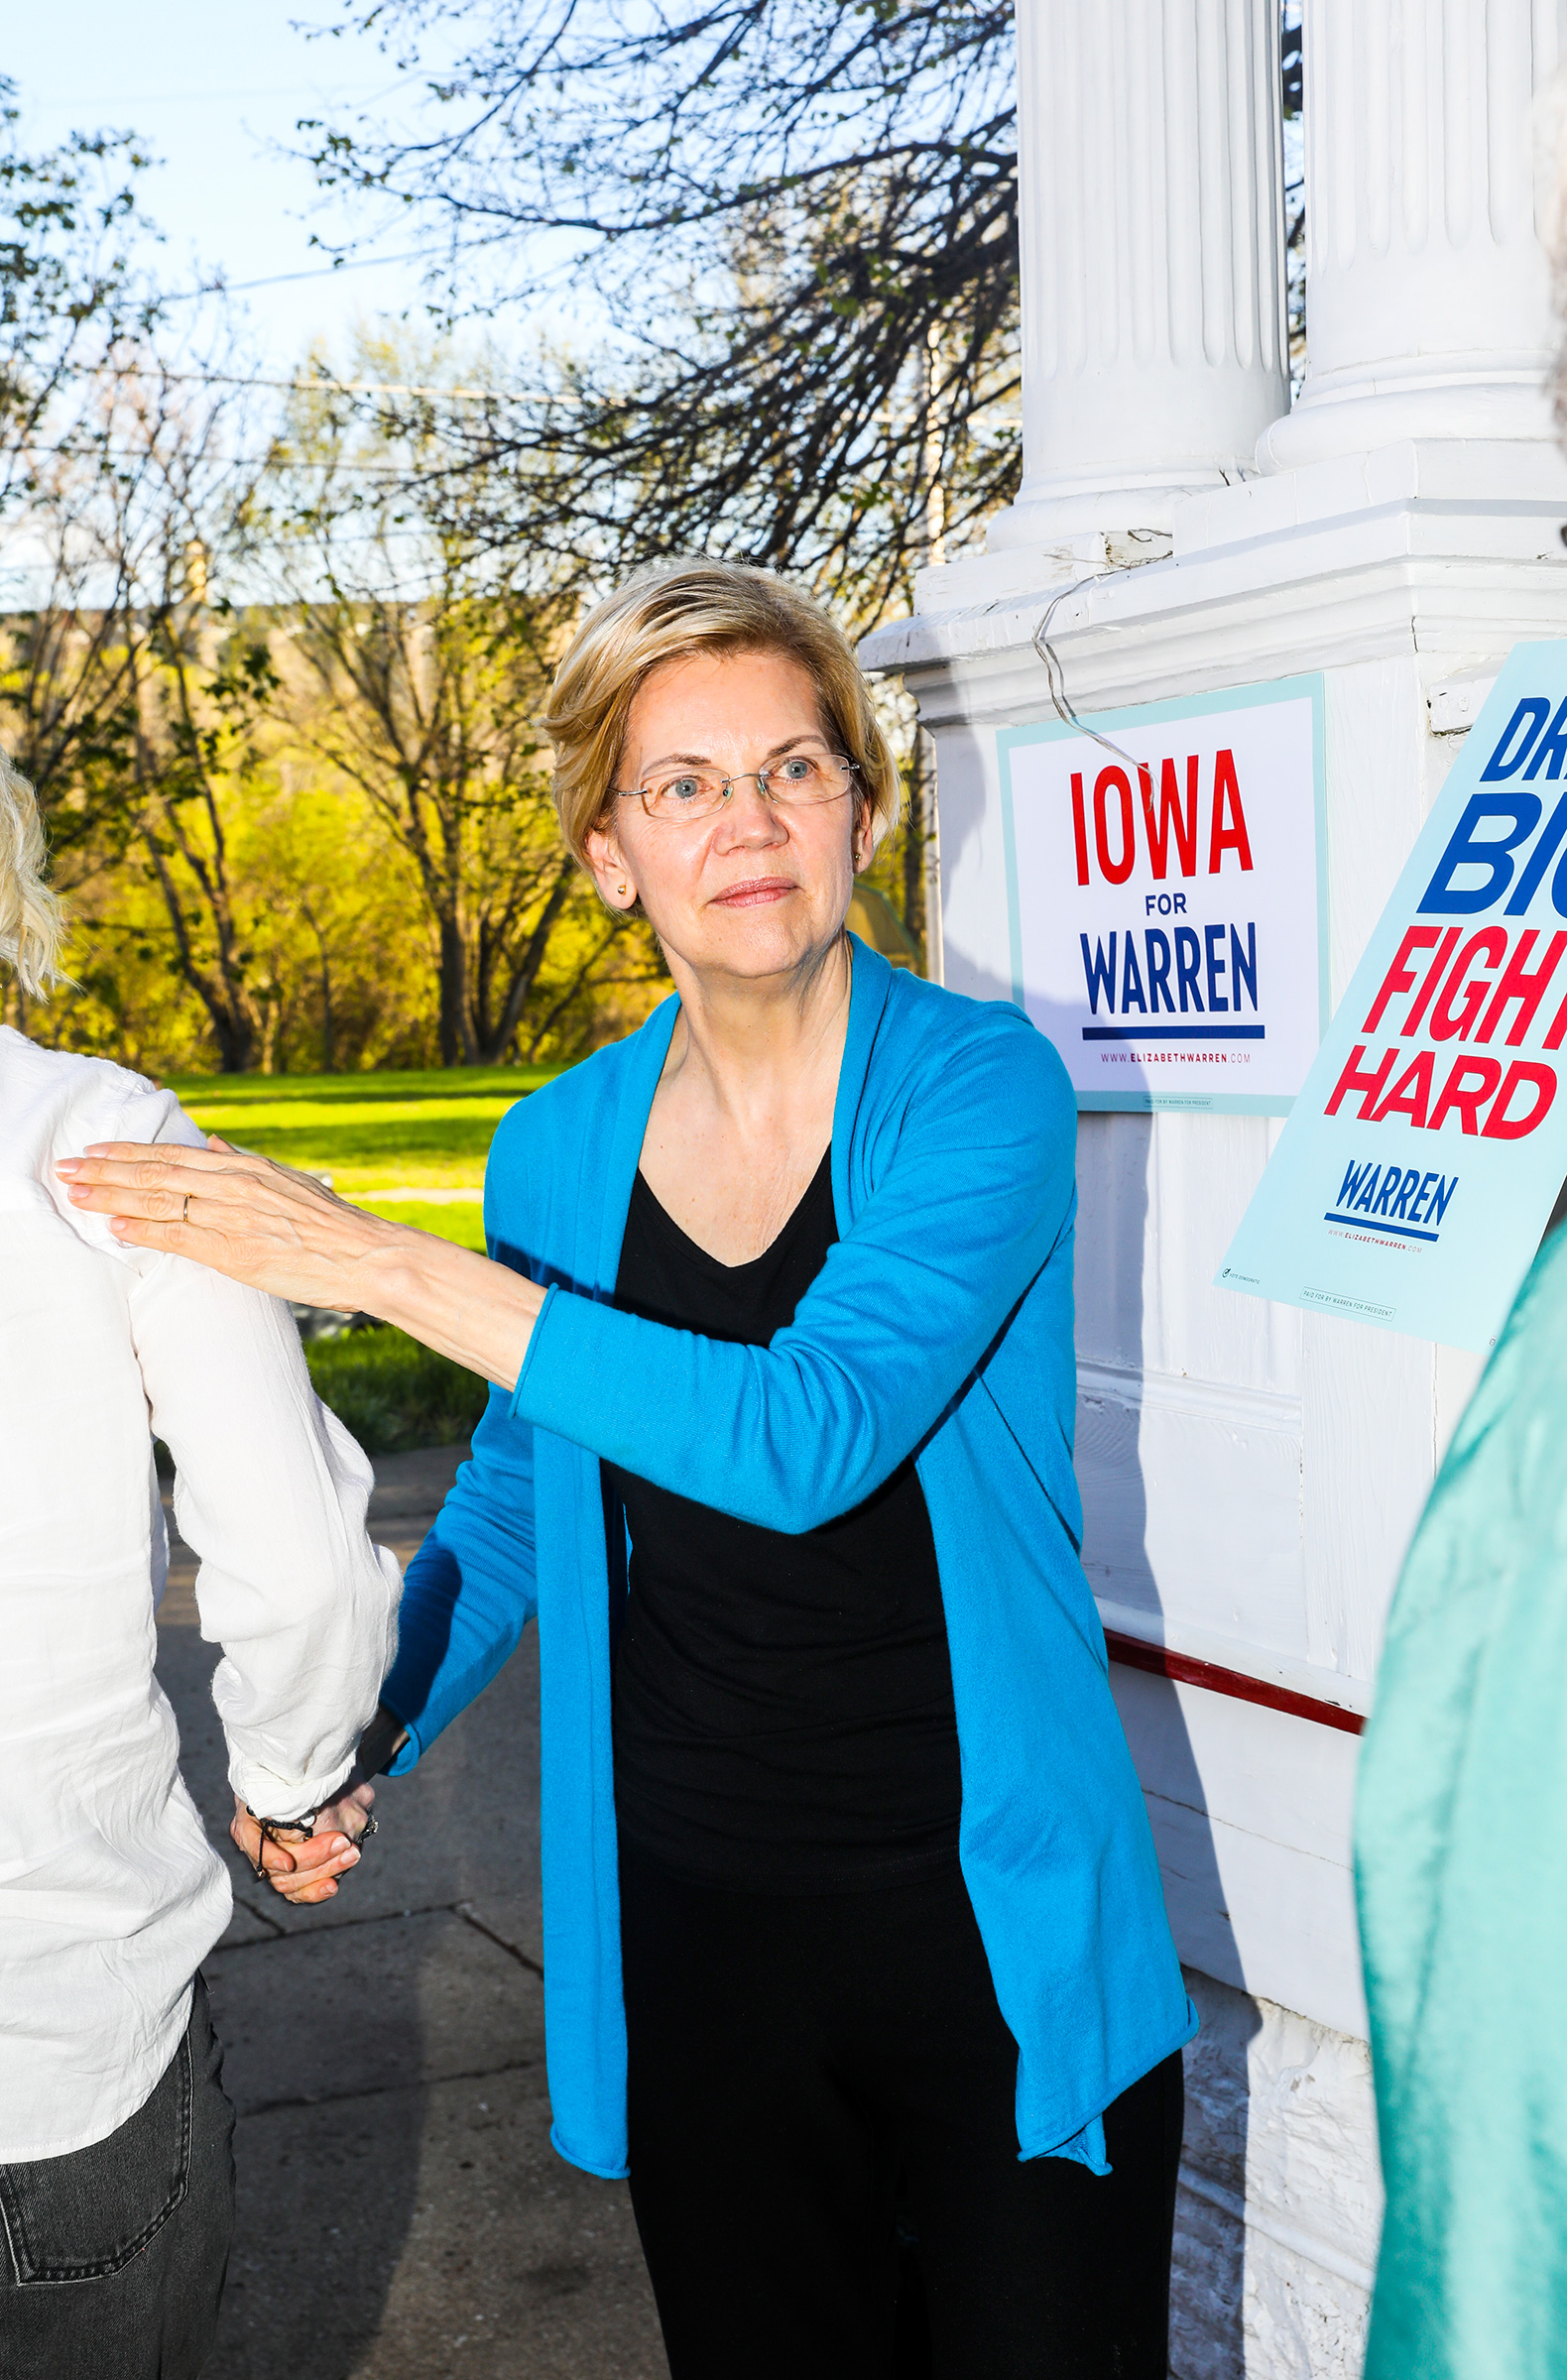 Warren greets supporters at a house party in Iowa Falls on May 3. (Krista Schlueter for TIME)